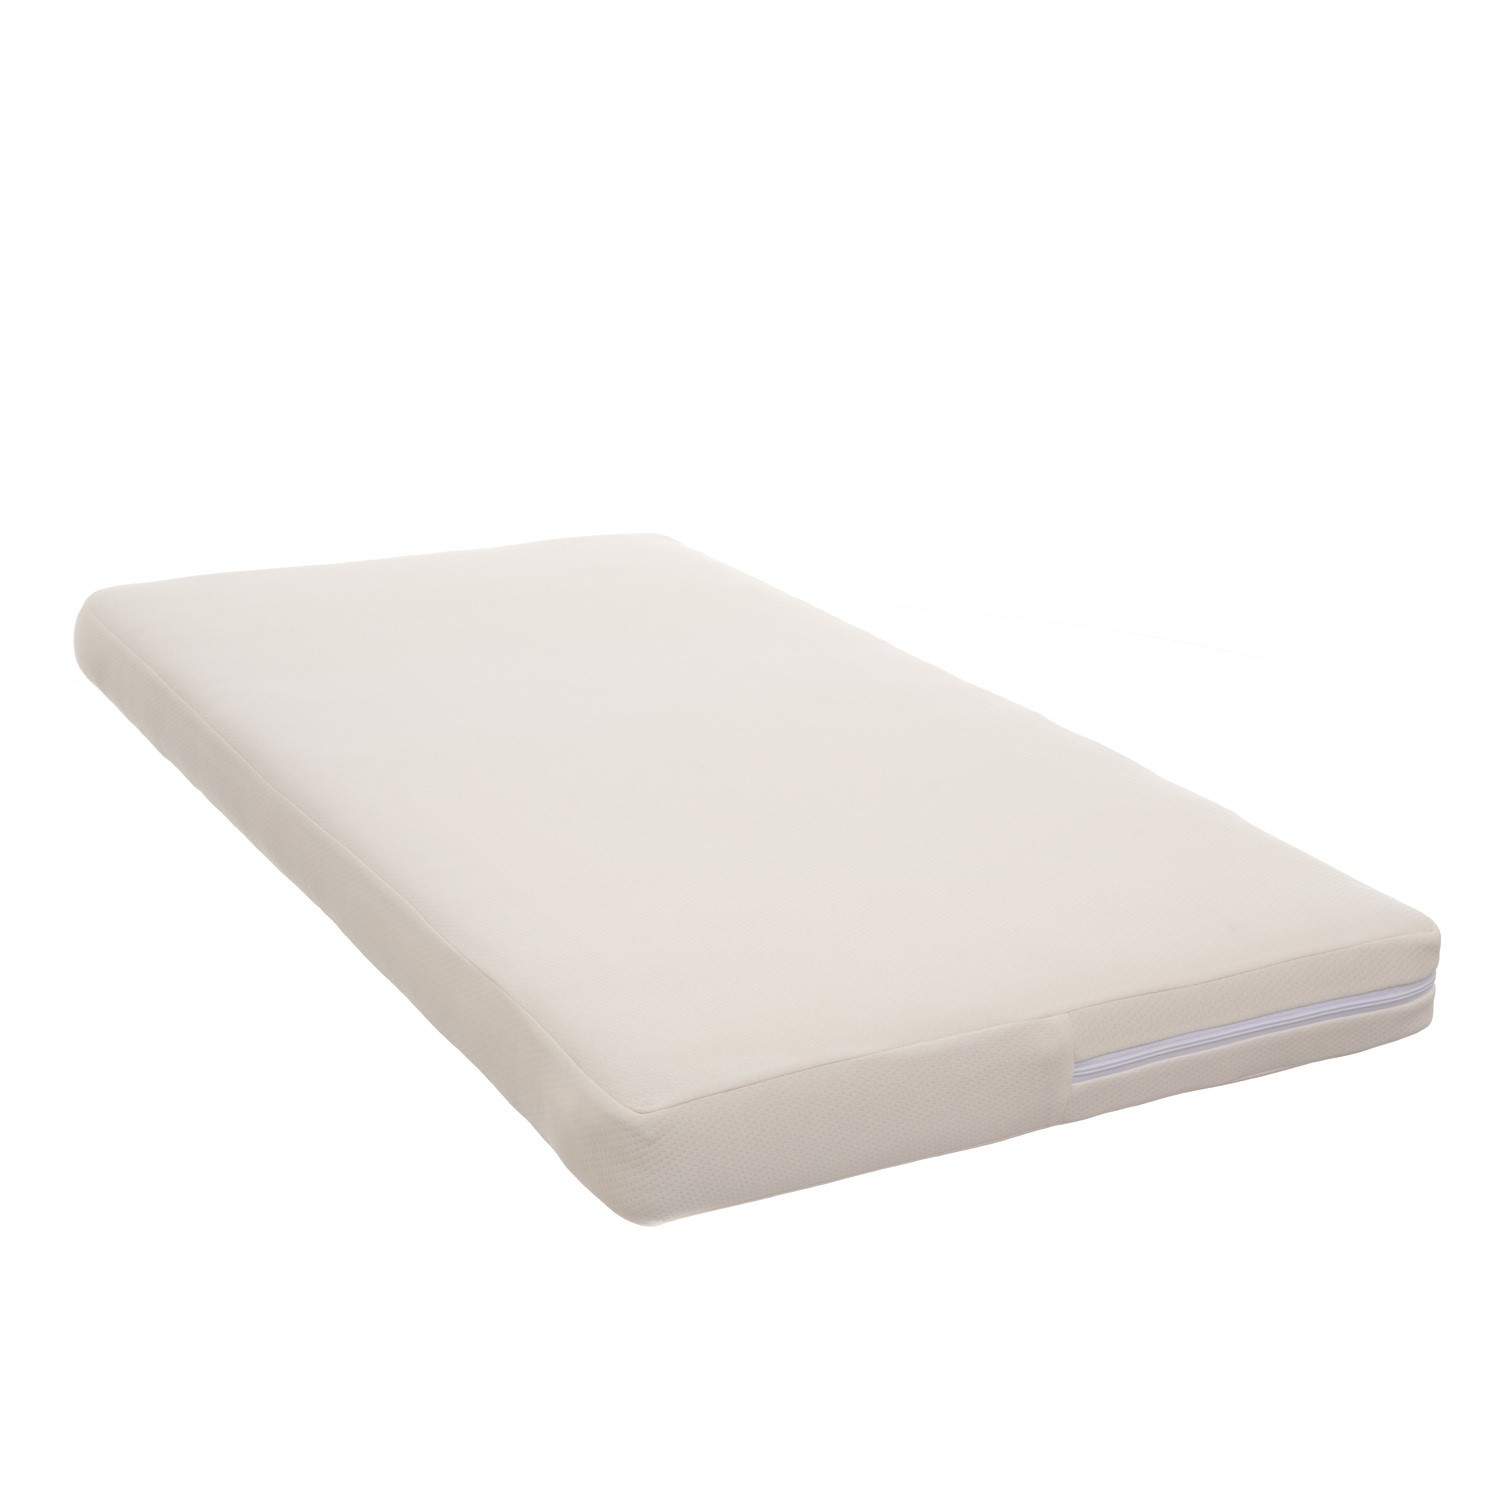 Natural wool cot bed mattress with removable cover - 140cm x 70cm - obaby